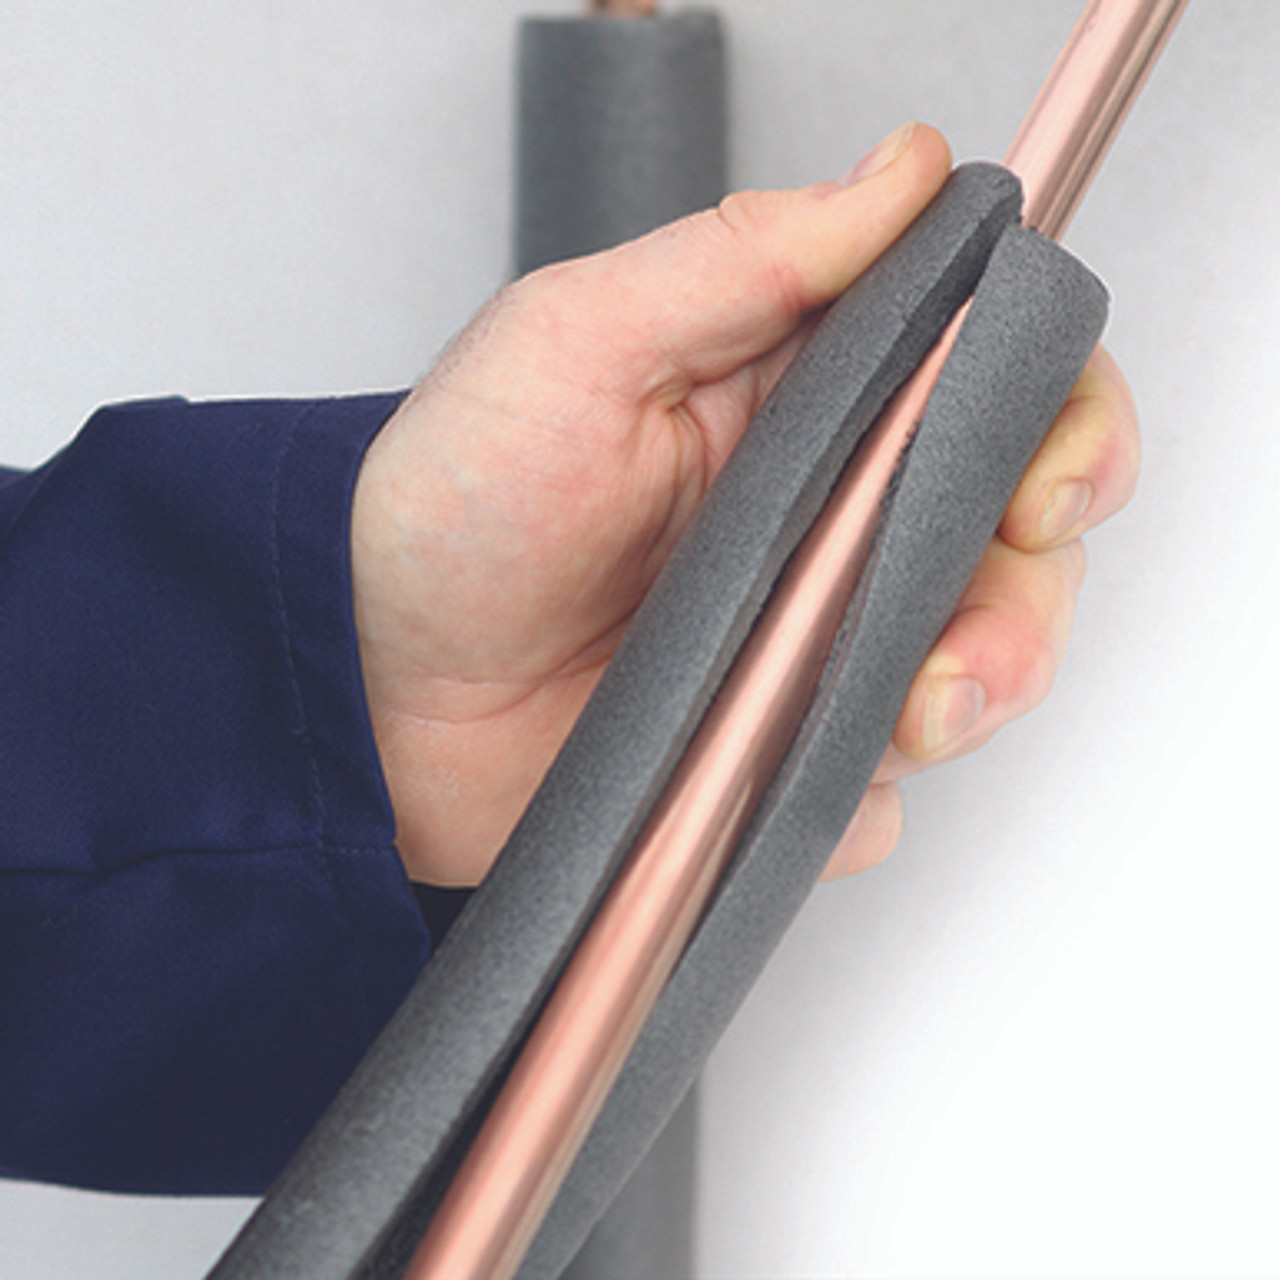 Installing pipe insulation onto copper pipe